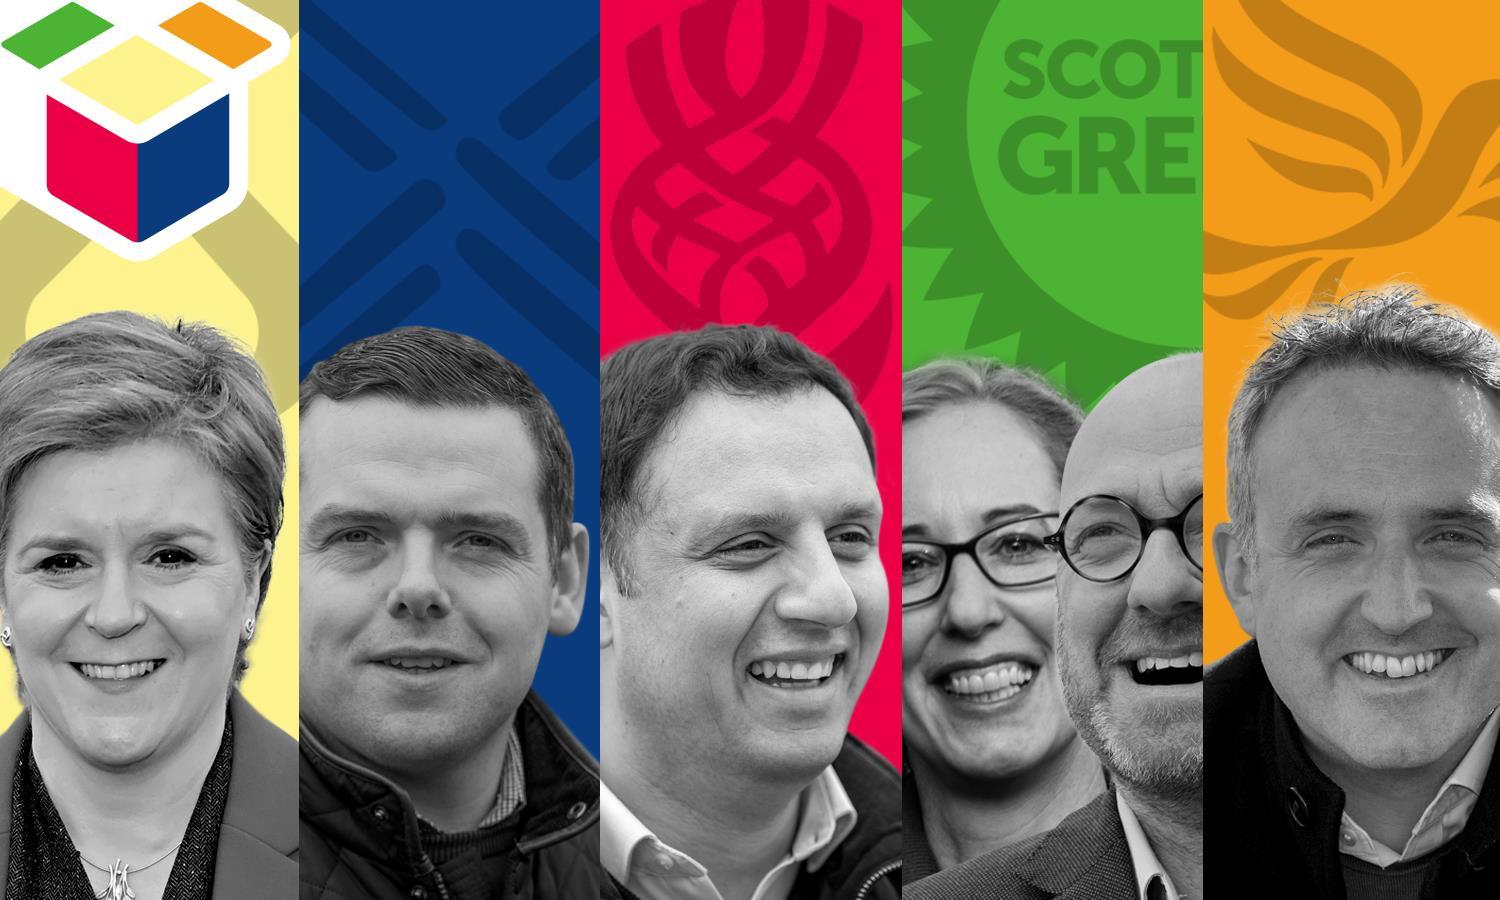 The leaders of Scotland's five main parties.